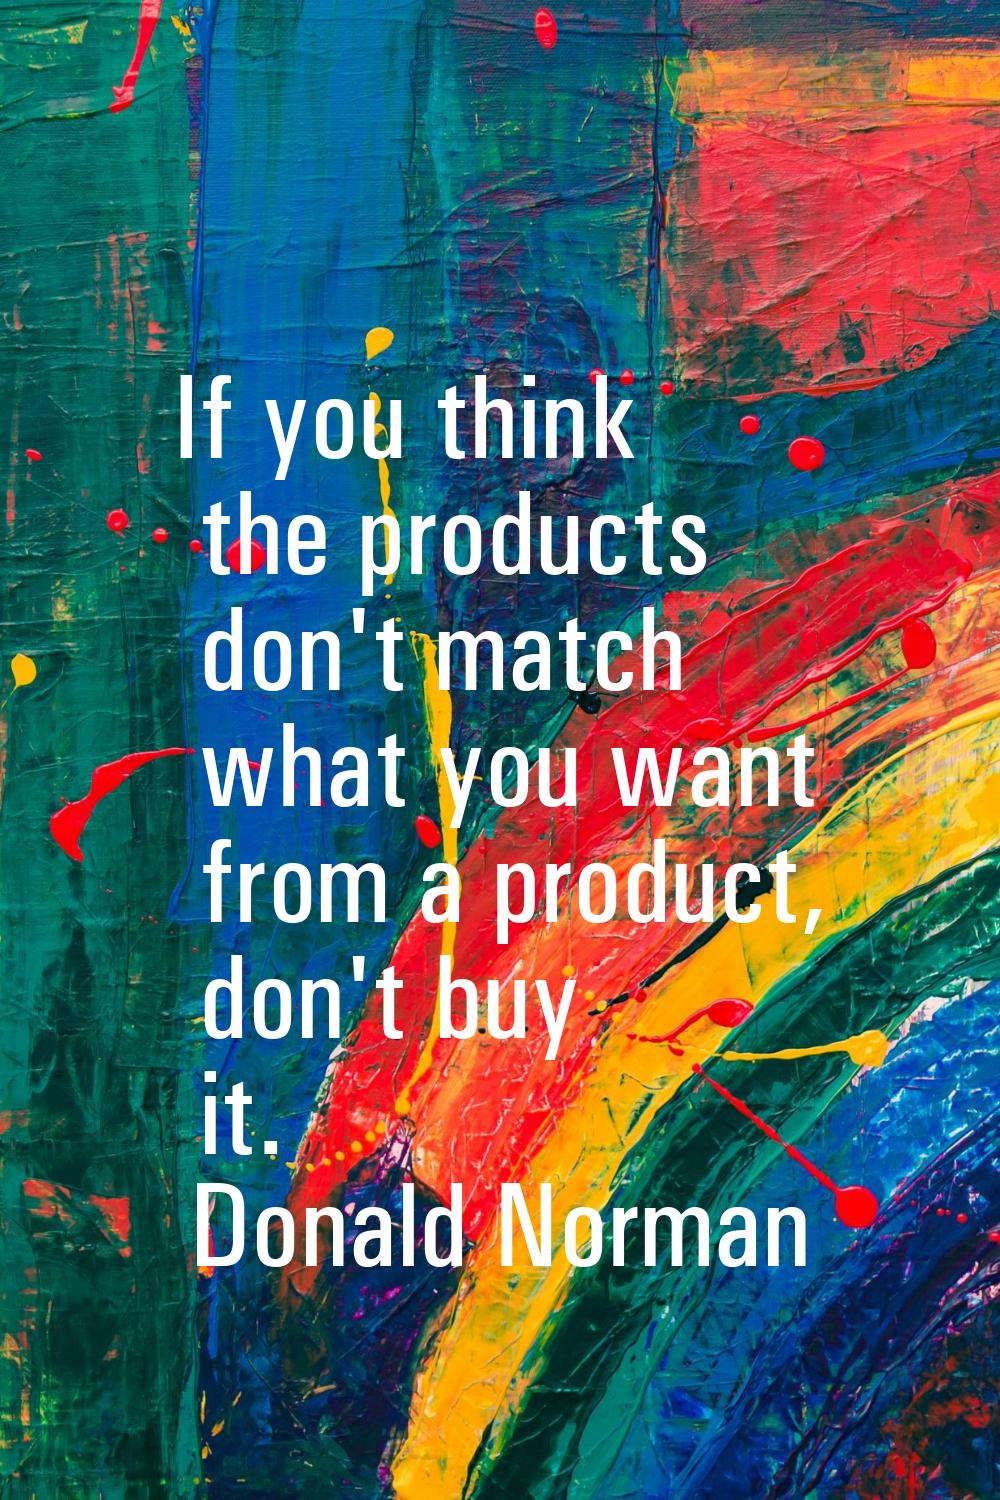 If you think the products don't match what you want from a product, don't buy it.